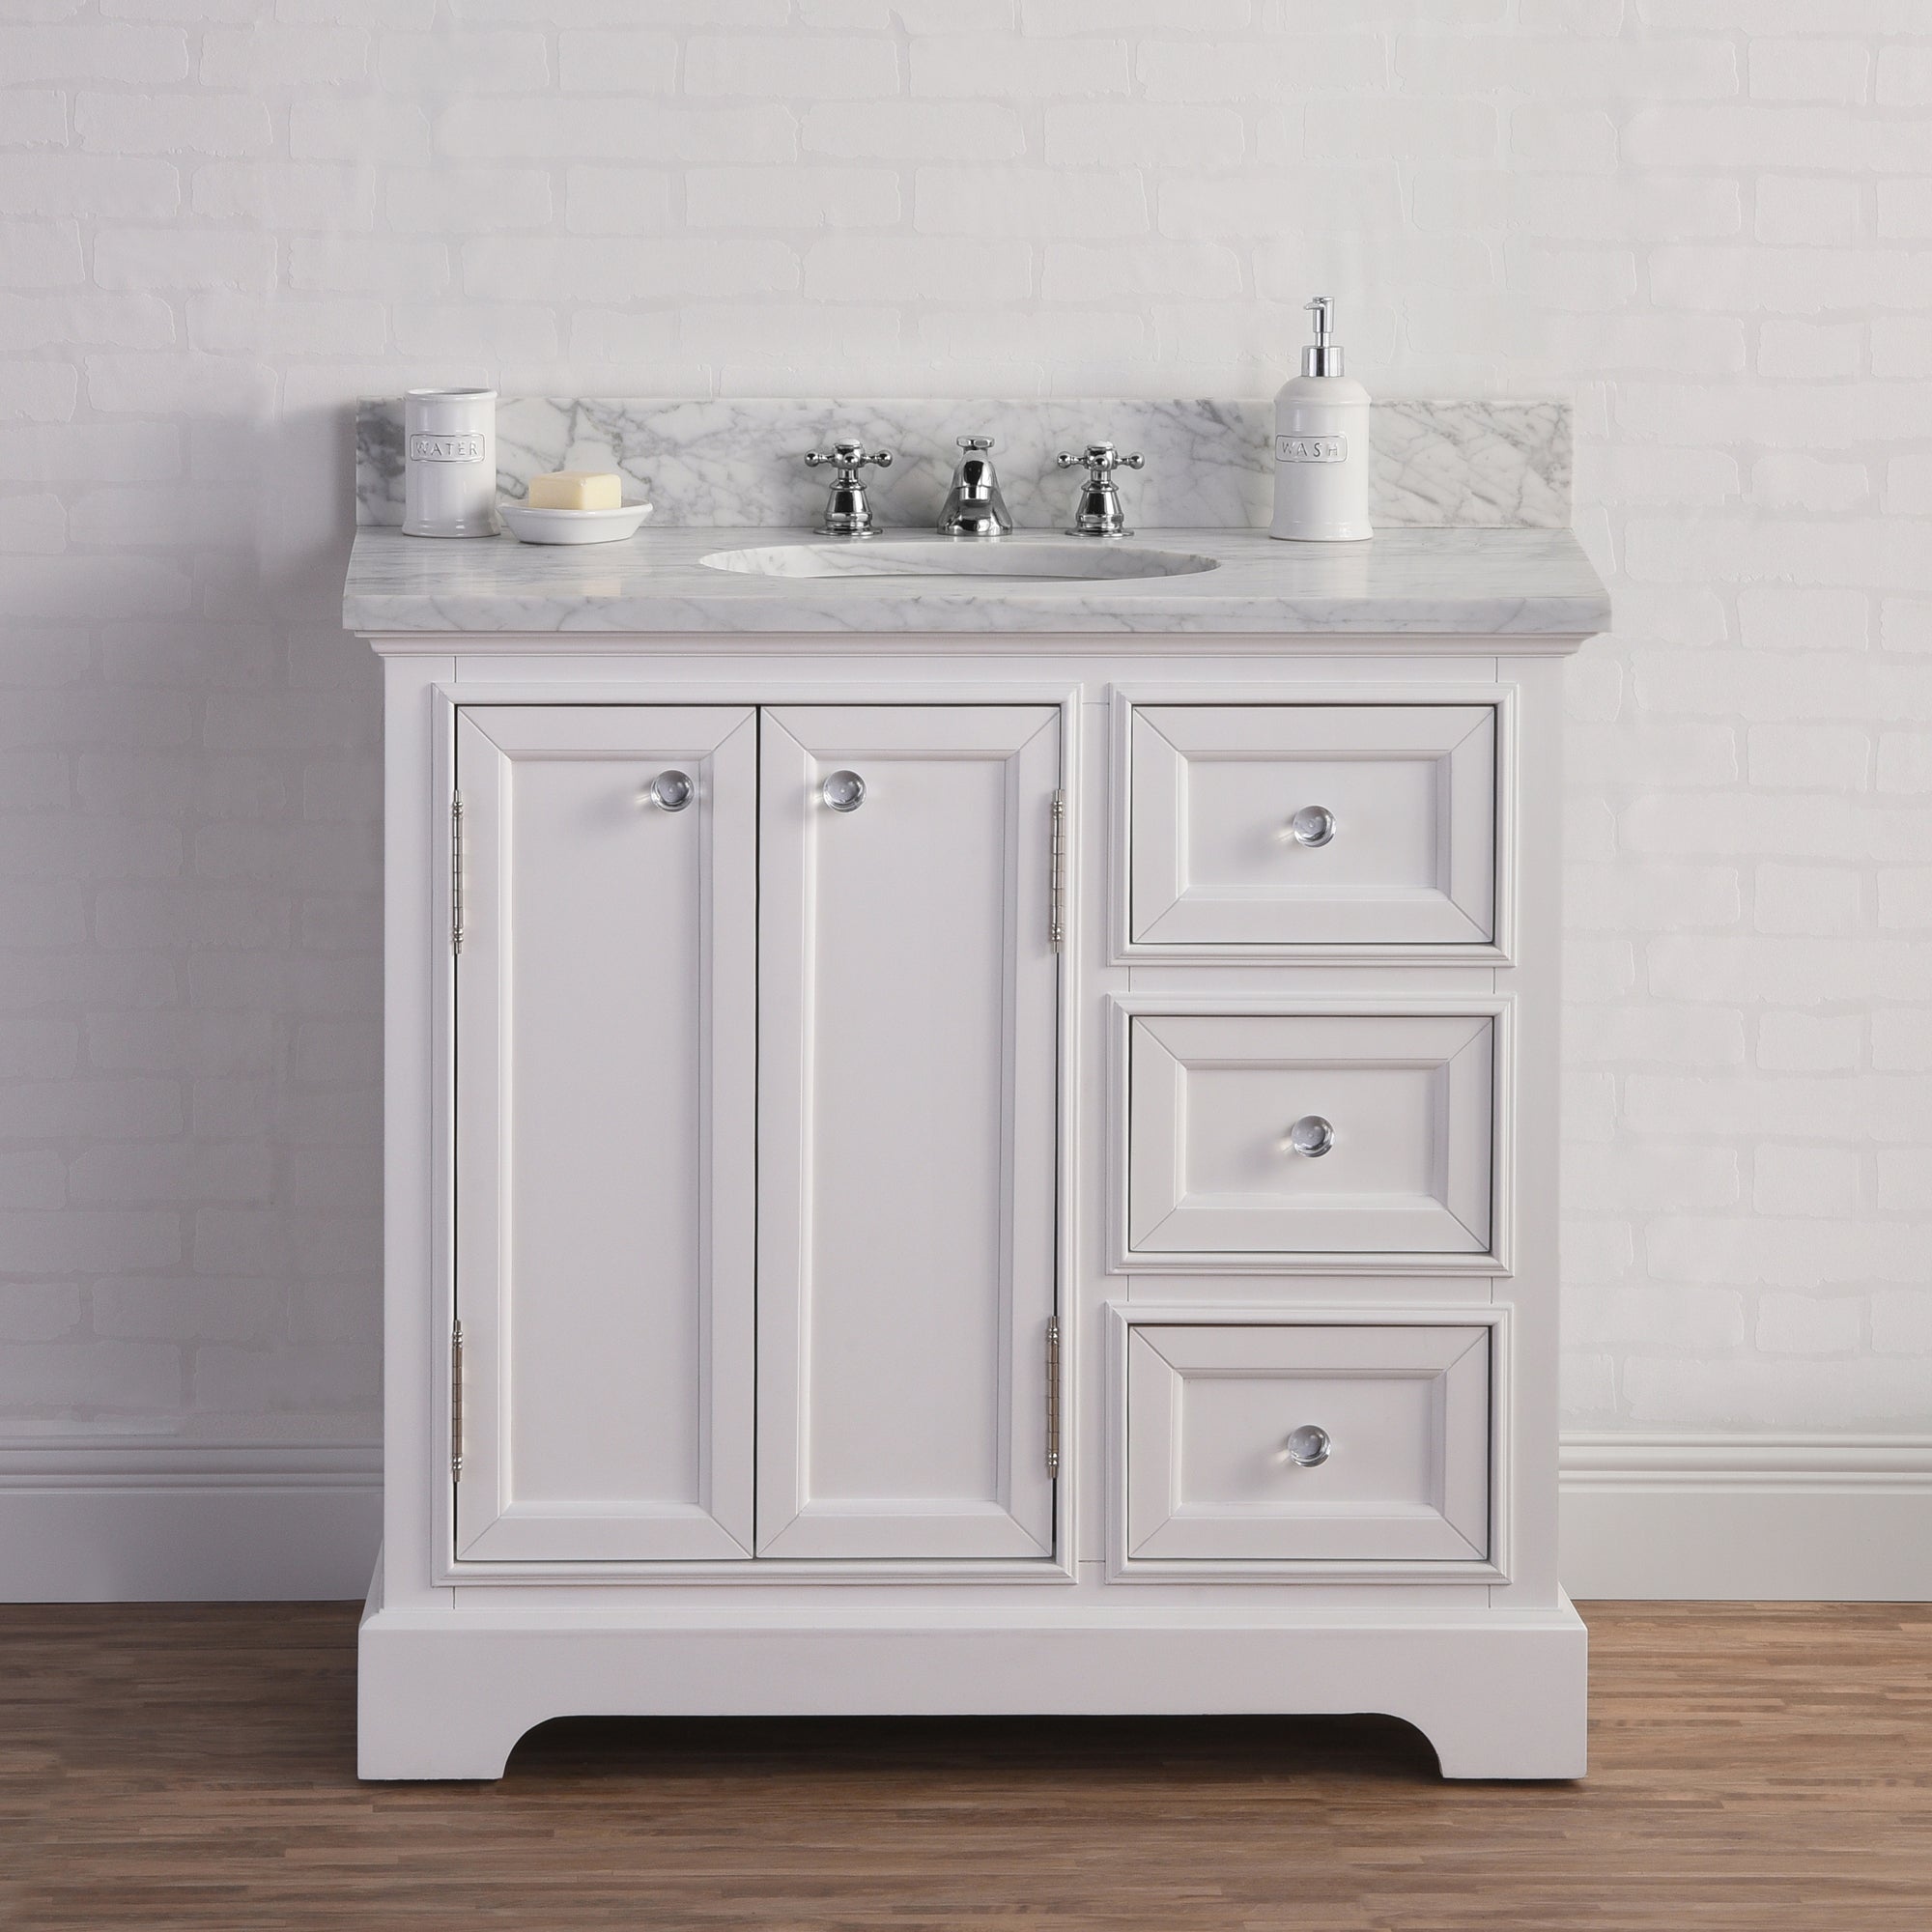 Water Creation | 36 Inch Wide Pure White Single Sink Carrara Marble Bathroom Vanity With Faucets From The Derby Collection | DE36CW01PW-000BX0901